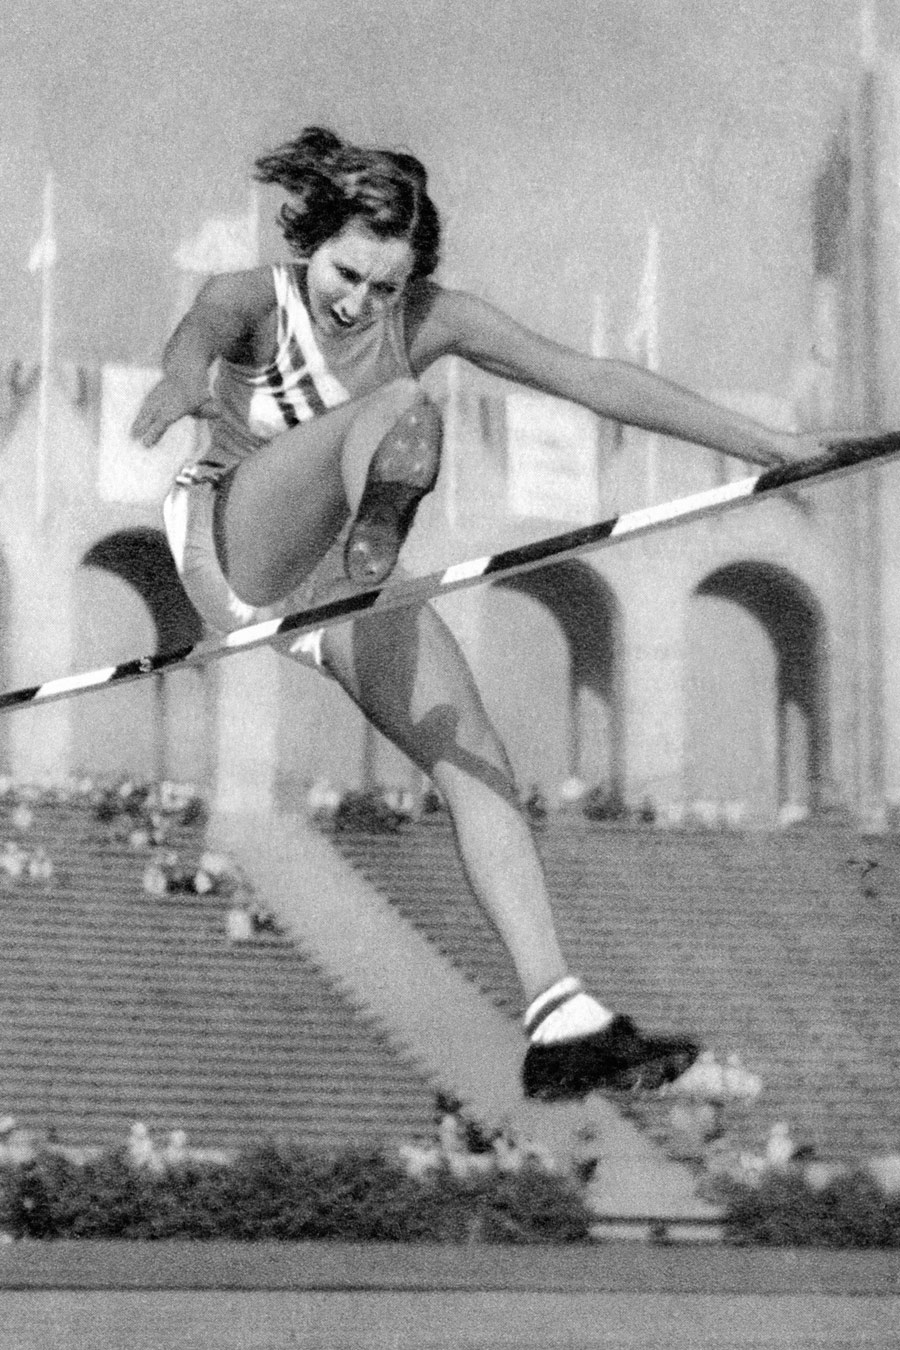 Jean Shiley demonstrates the style that lifted her to gold in the high jump